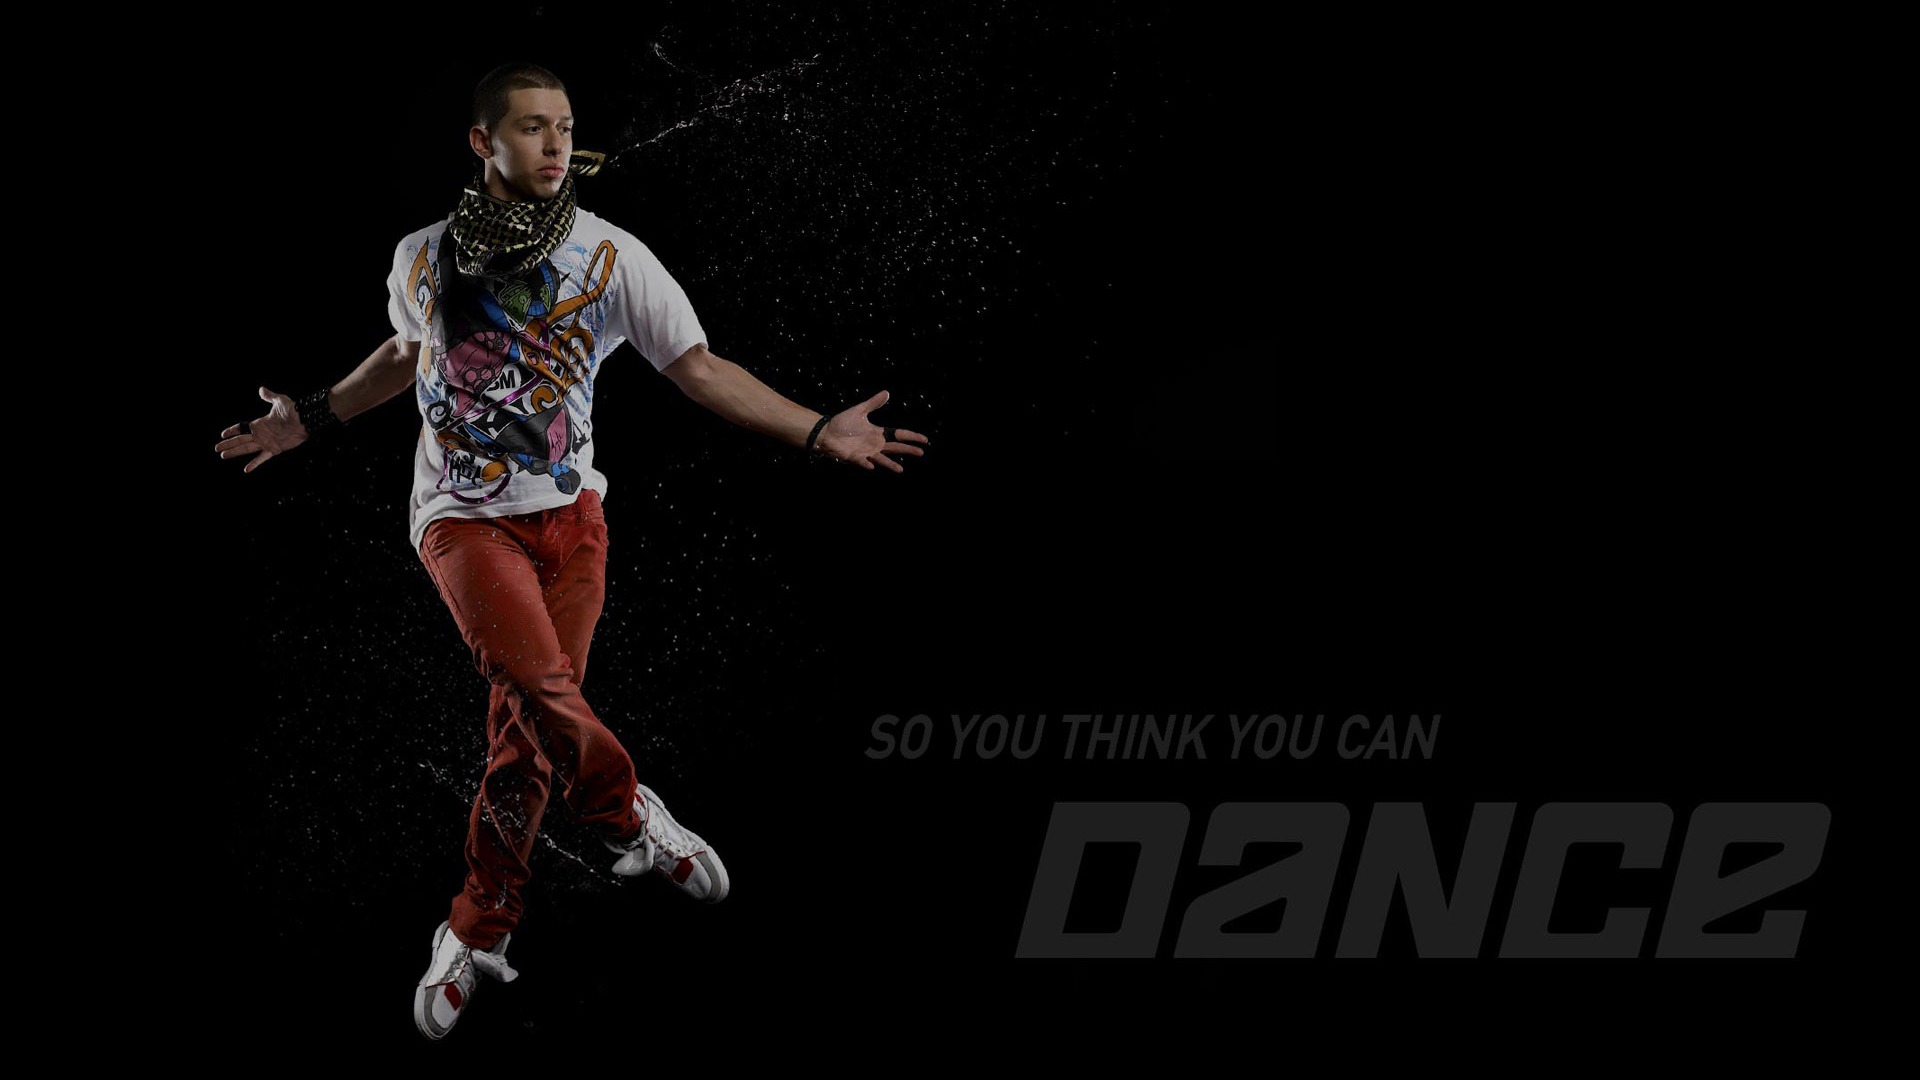 So You Think You Can Dance wallpaper (1) #16 - 1920x1080